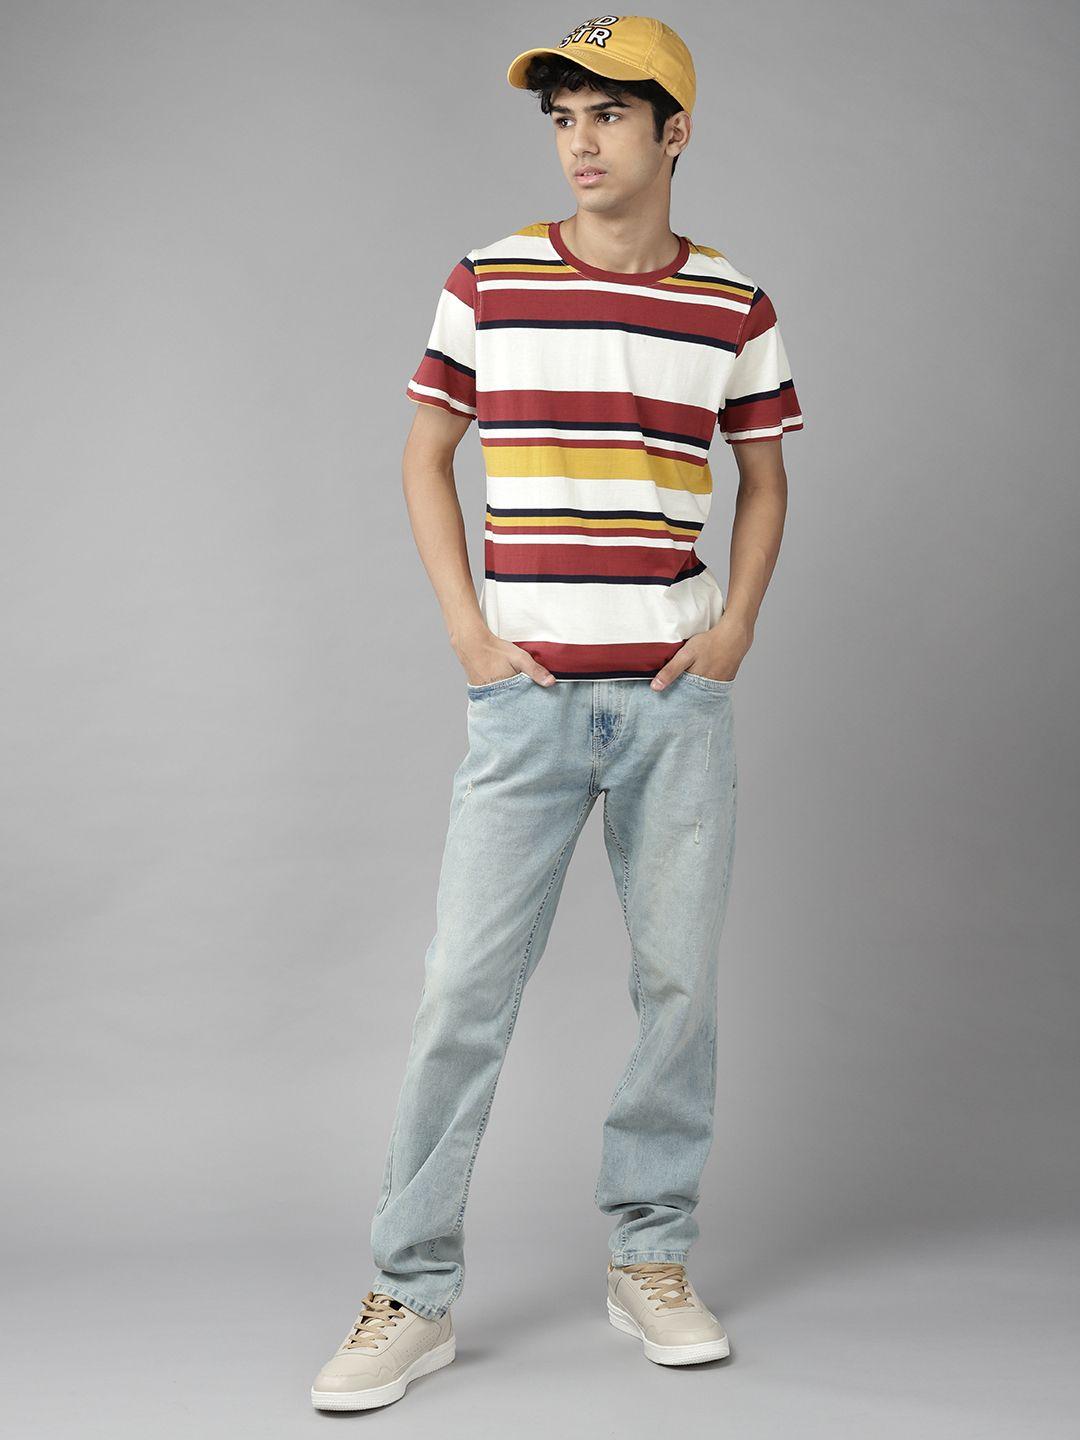 uth by roadster boys cream-coloured & maroon cotton striped t-shirt